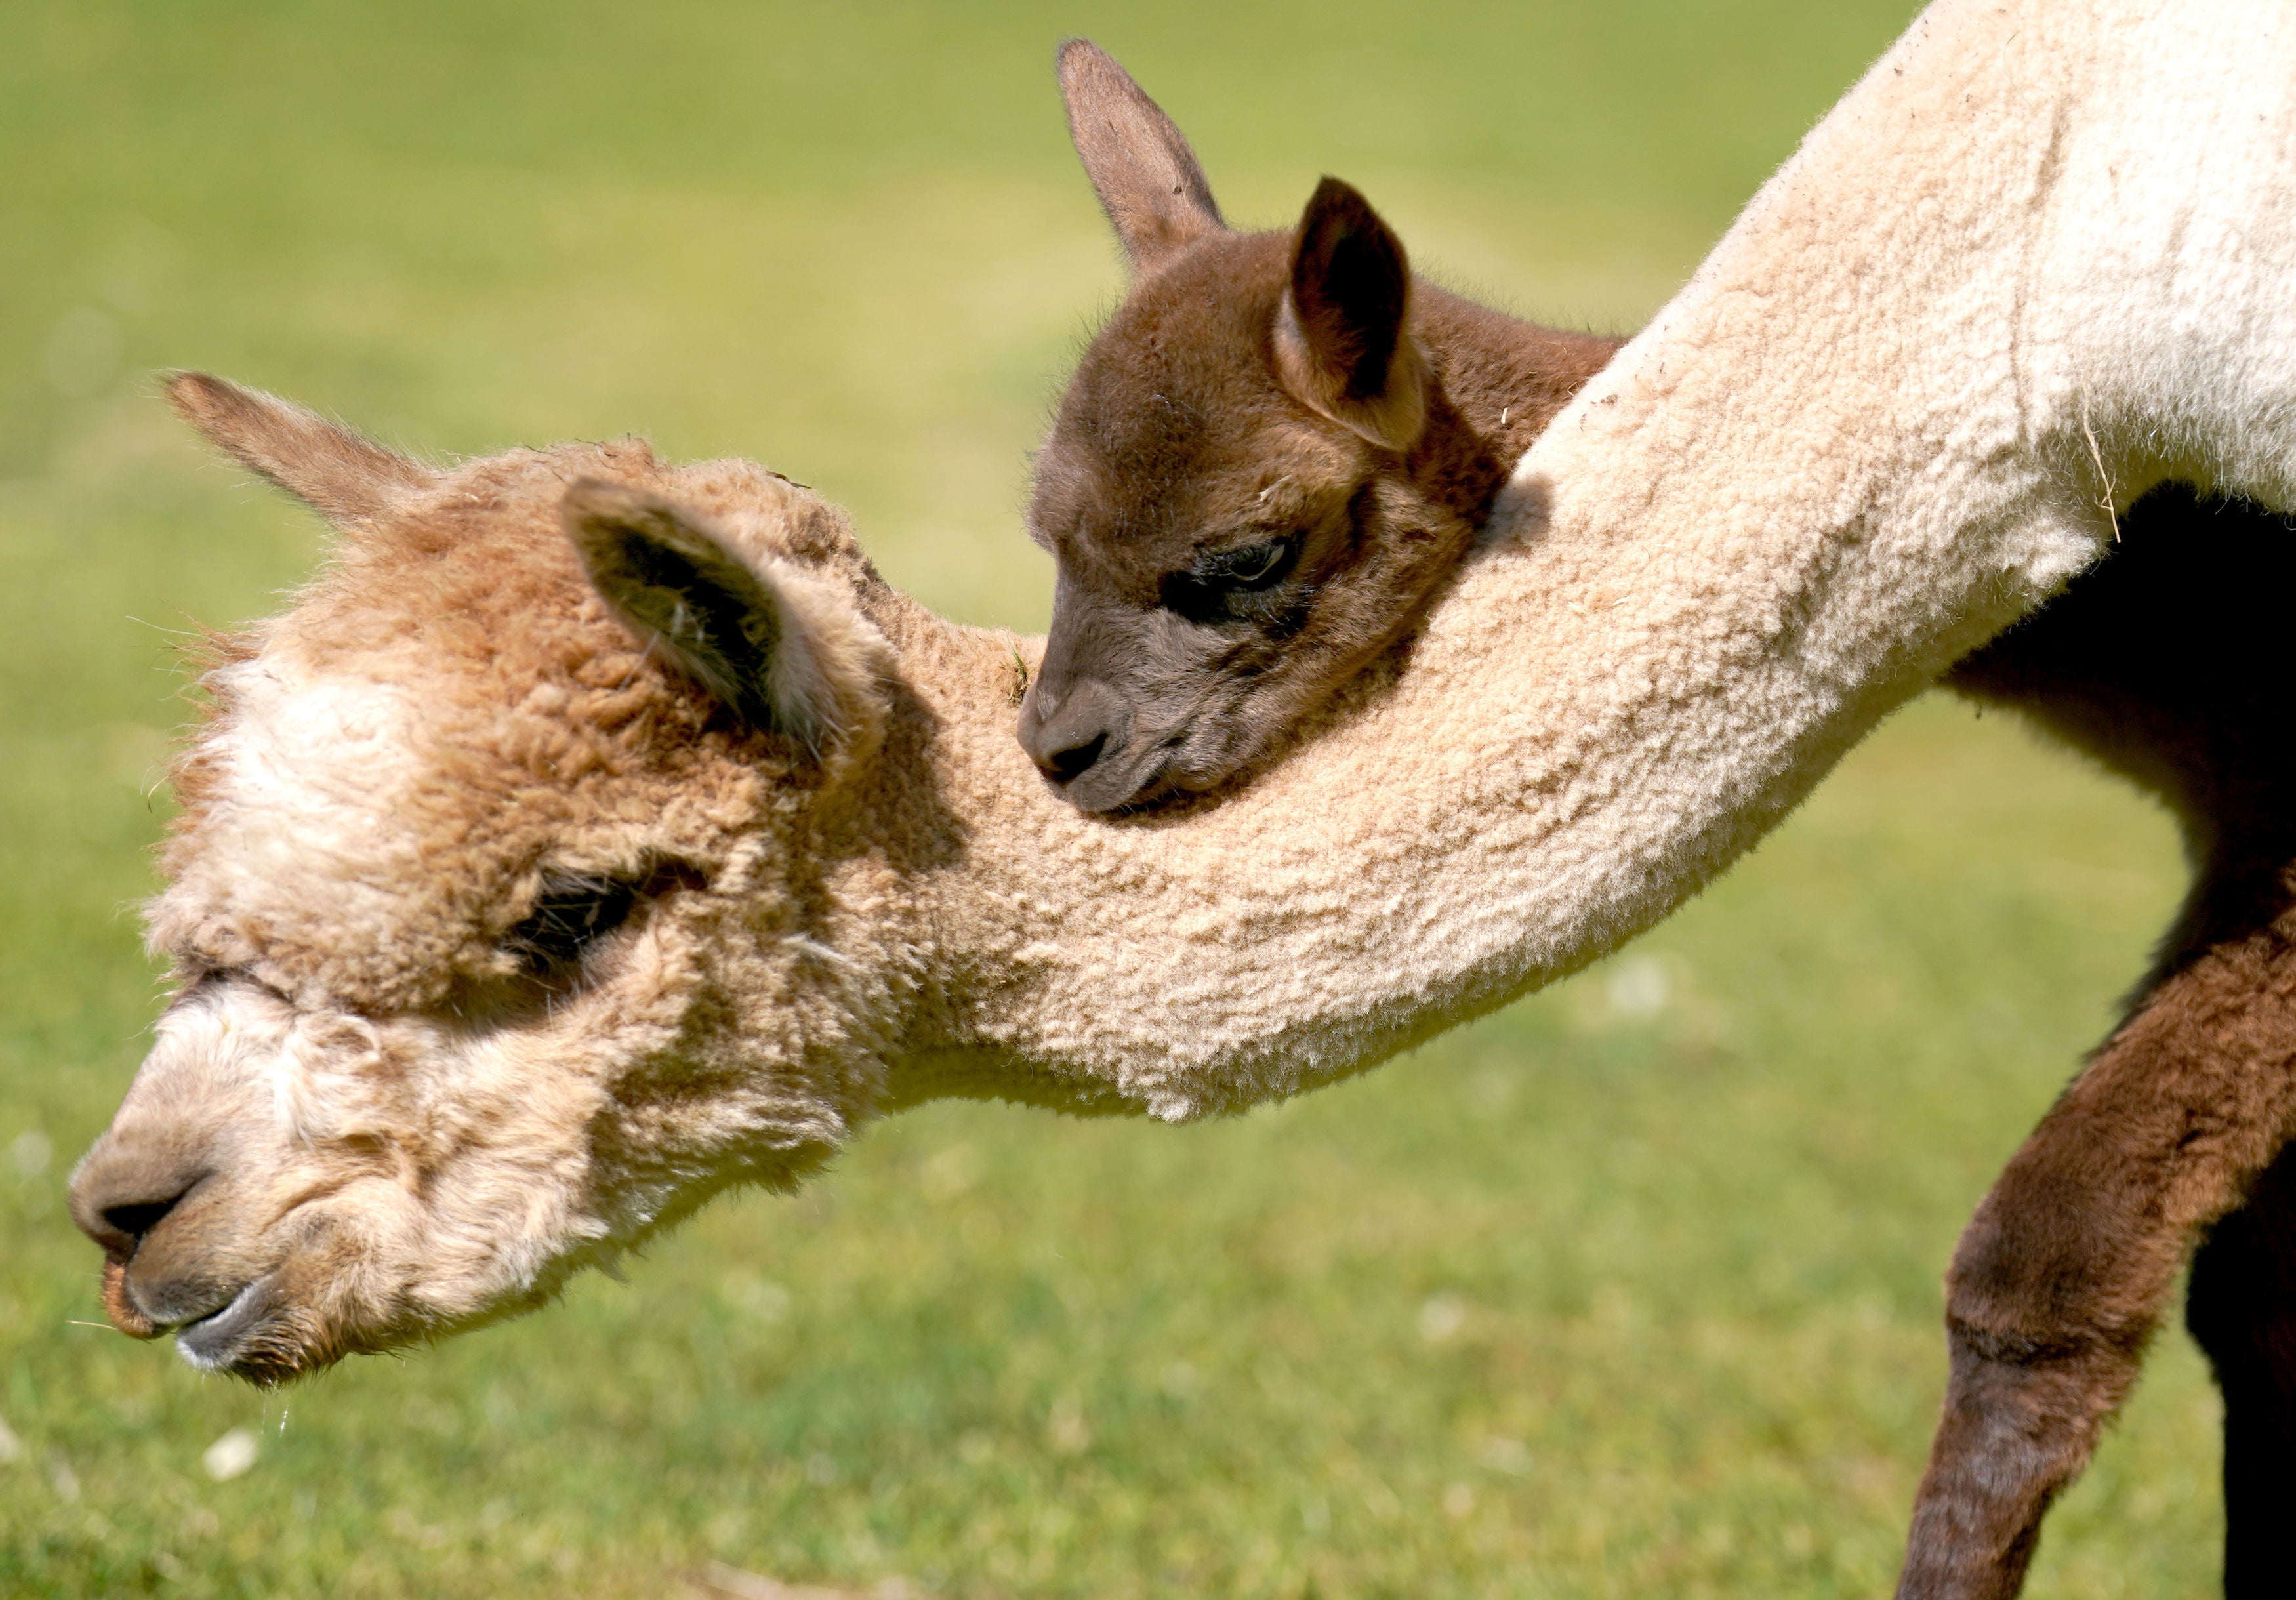 Newborn alpaca Sir Steveo, who has been named after one of his keepers, ventures outside in the Pets Farm area of Blair Drummond Safari Park near Stirling